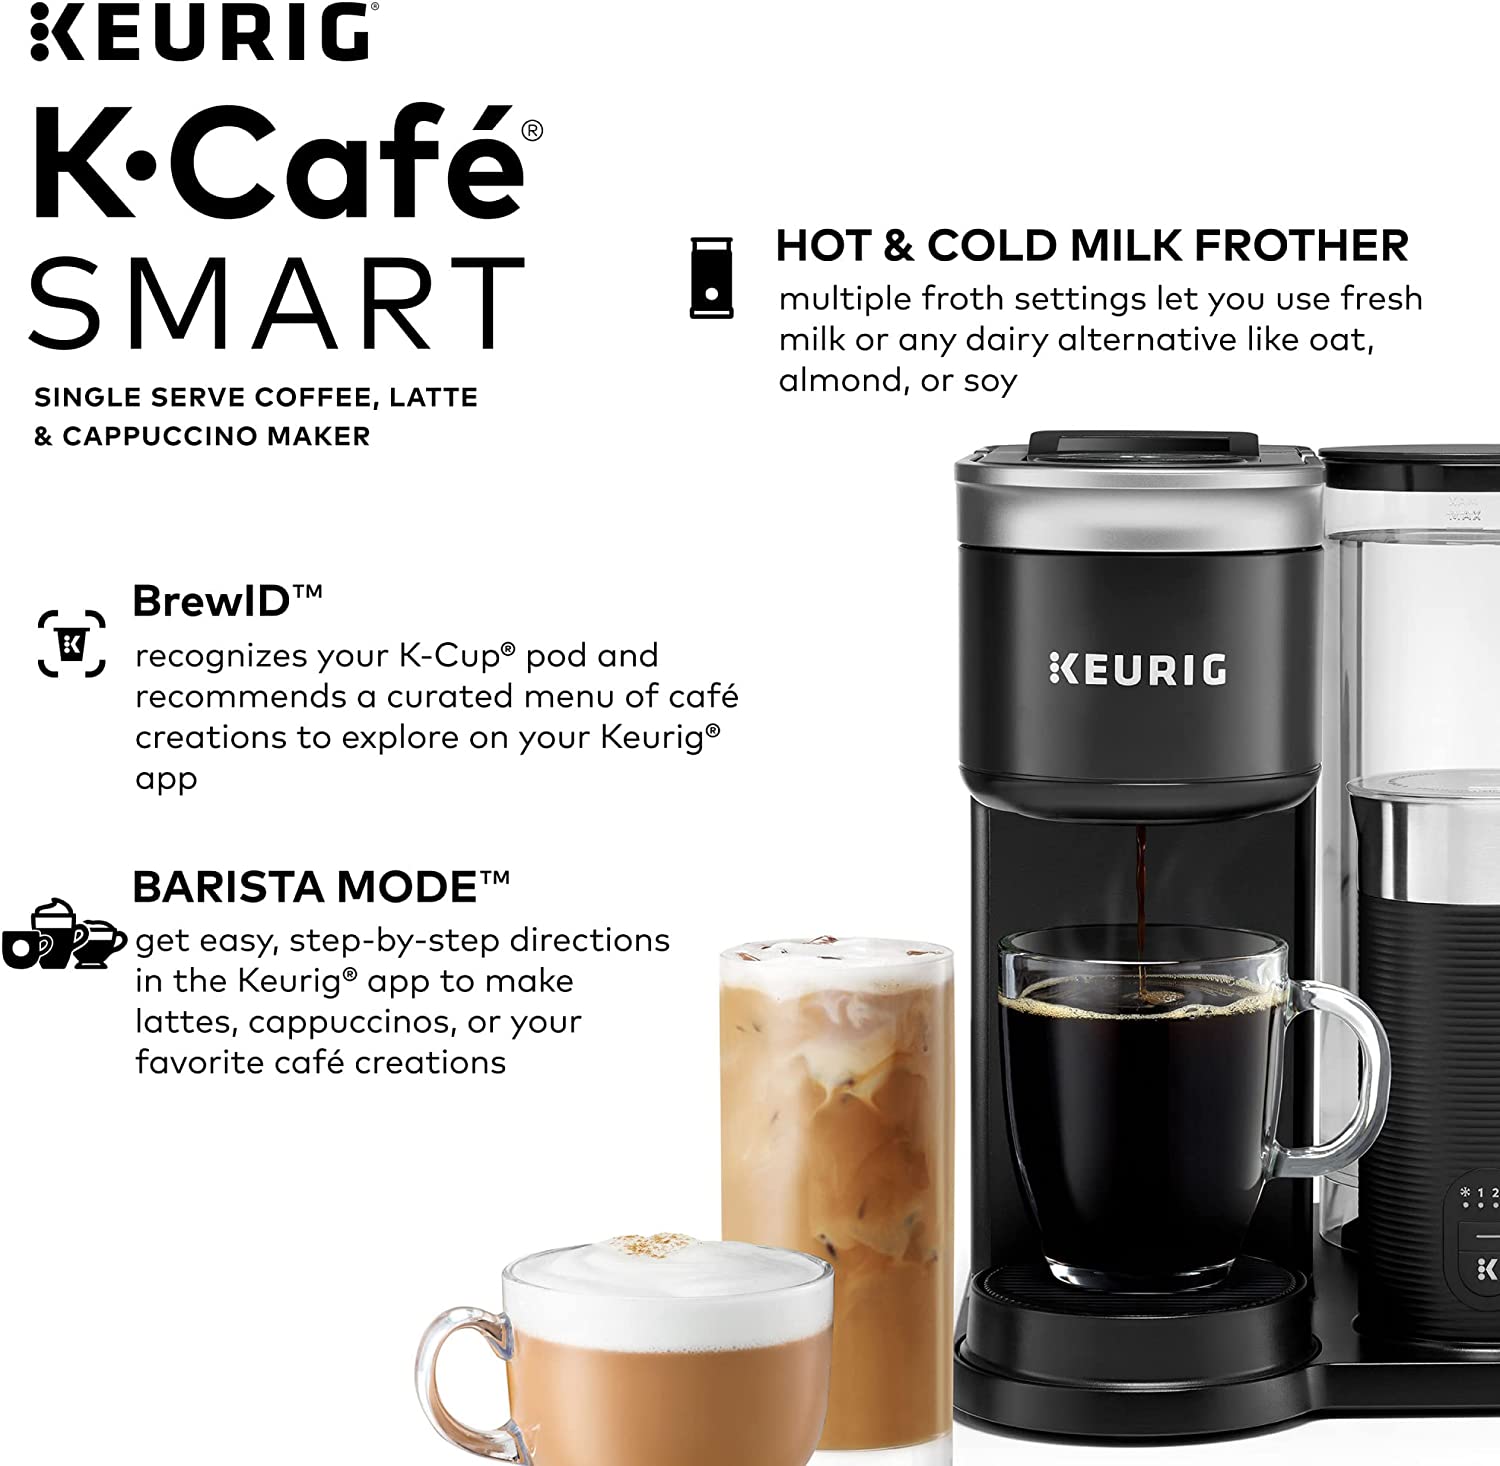 https://discounttoday.net/wp-content/uploads/2022/11/Keurig-K-Cafe-SMART-Single-Serve-Coffee-Maker-with-WiFi-Compatibility-4.jpg